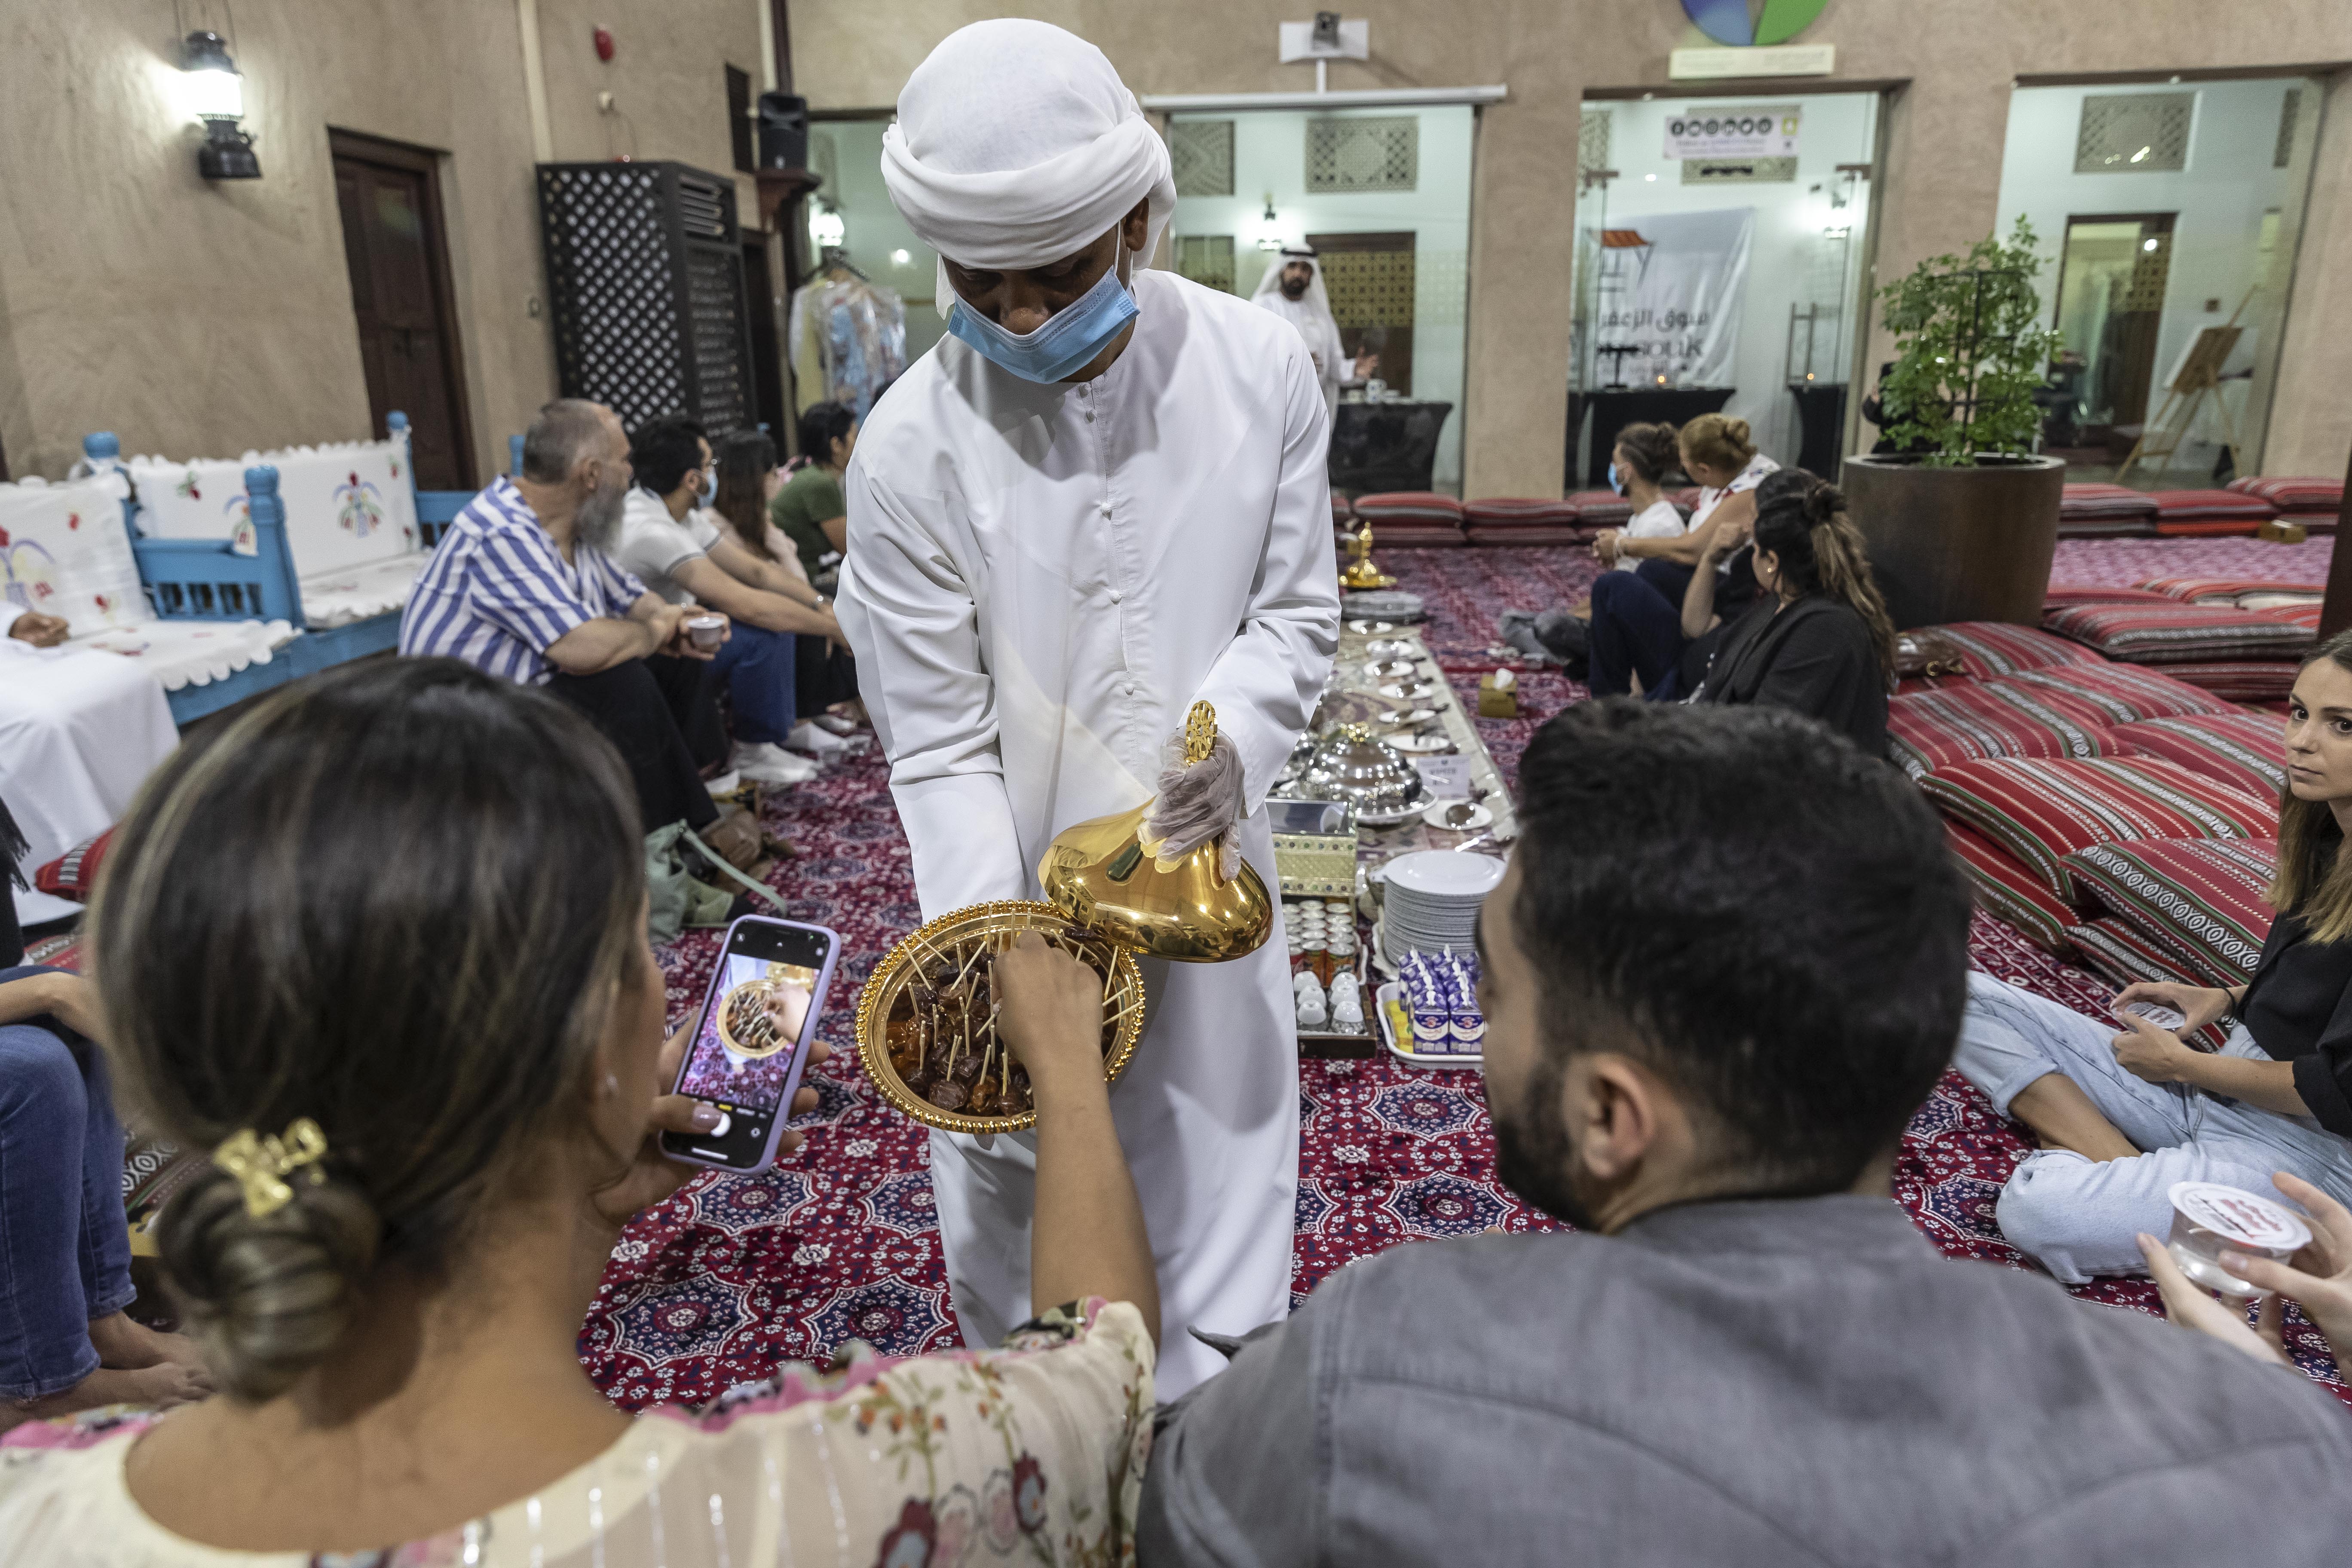 A member of the Sheikh Mohammed bin Rashid Al Maktoum Centre for Cultural Understanding serves visitors dates to break fast with. All photos: Antonie Robertson / The National